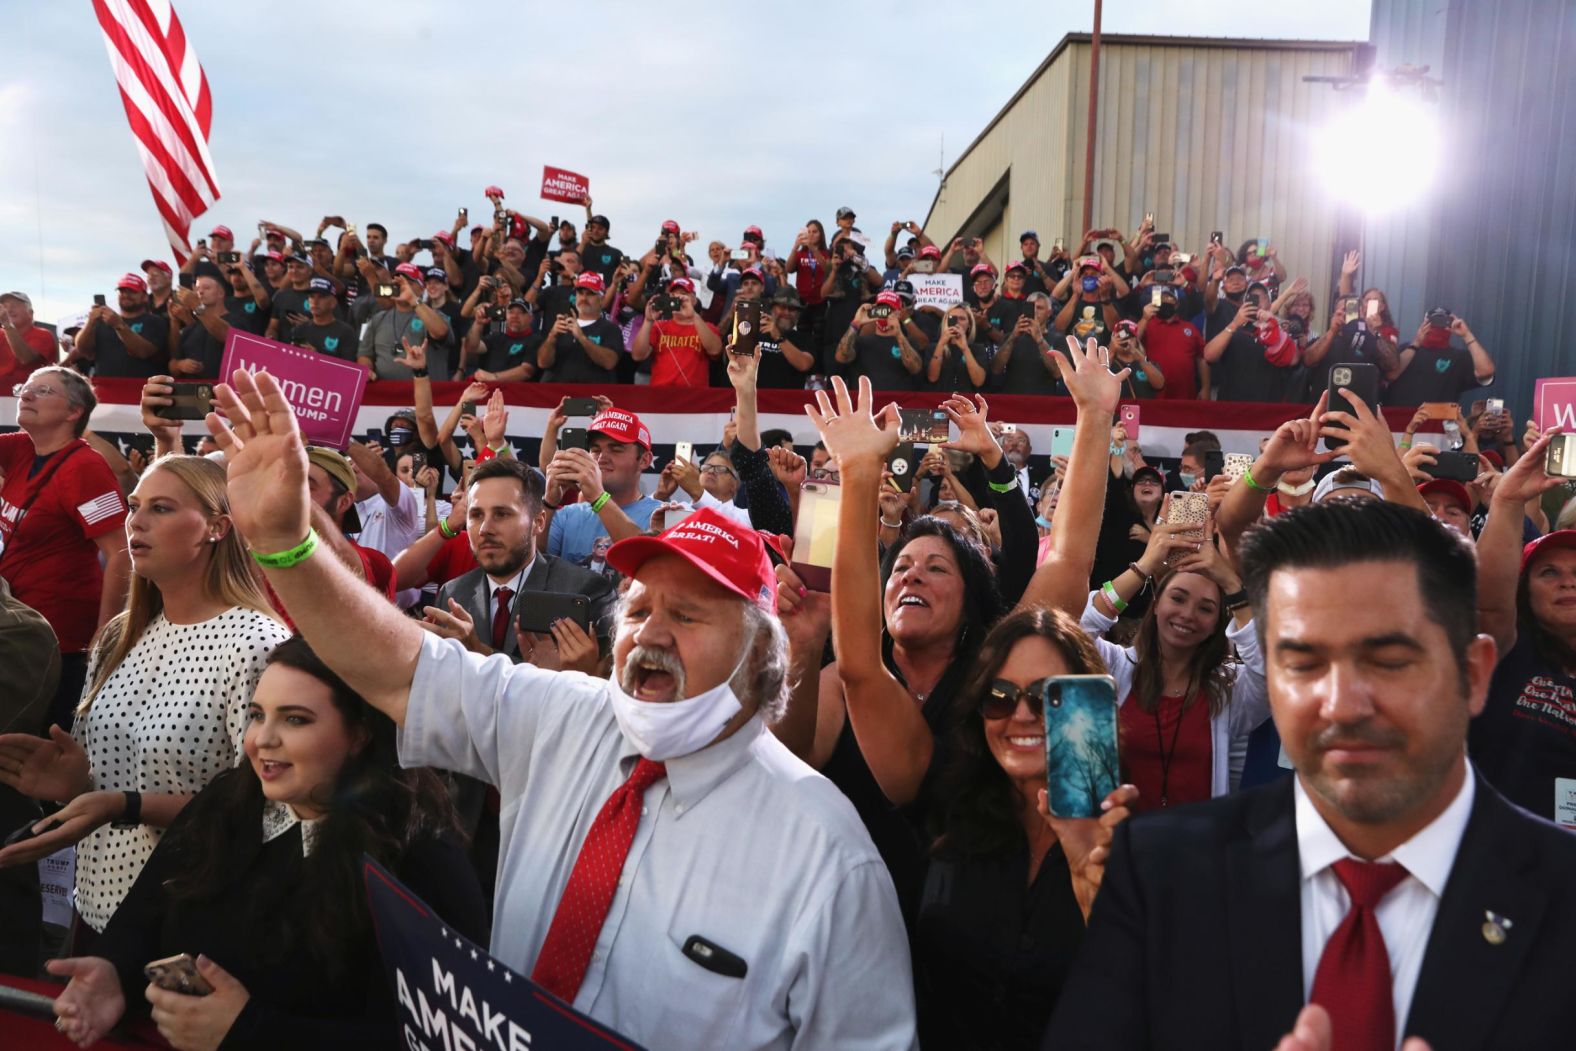 Supporters react as Trump delivers a speech September 3 at Arnold Palmer Regional Airport in Latrobe, Pennsylvania. <a href="index.php?page=&url=https%3A%2F%2Fwww.cnn.com%2F2020%2F09%2F03%2Fpolitics%2Ftrump-biden-coronavirus-mask%2Findex.html" target="_blank">Speaking to a largely maskless crowd,</a> Trump at one point mocked Biden: "Did you ever see a man that likes a mask as much as him?"